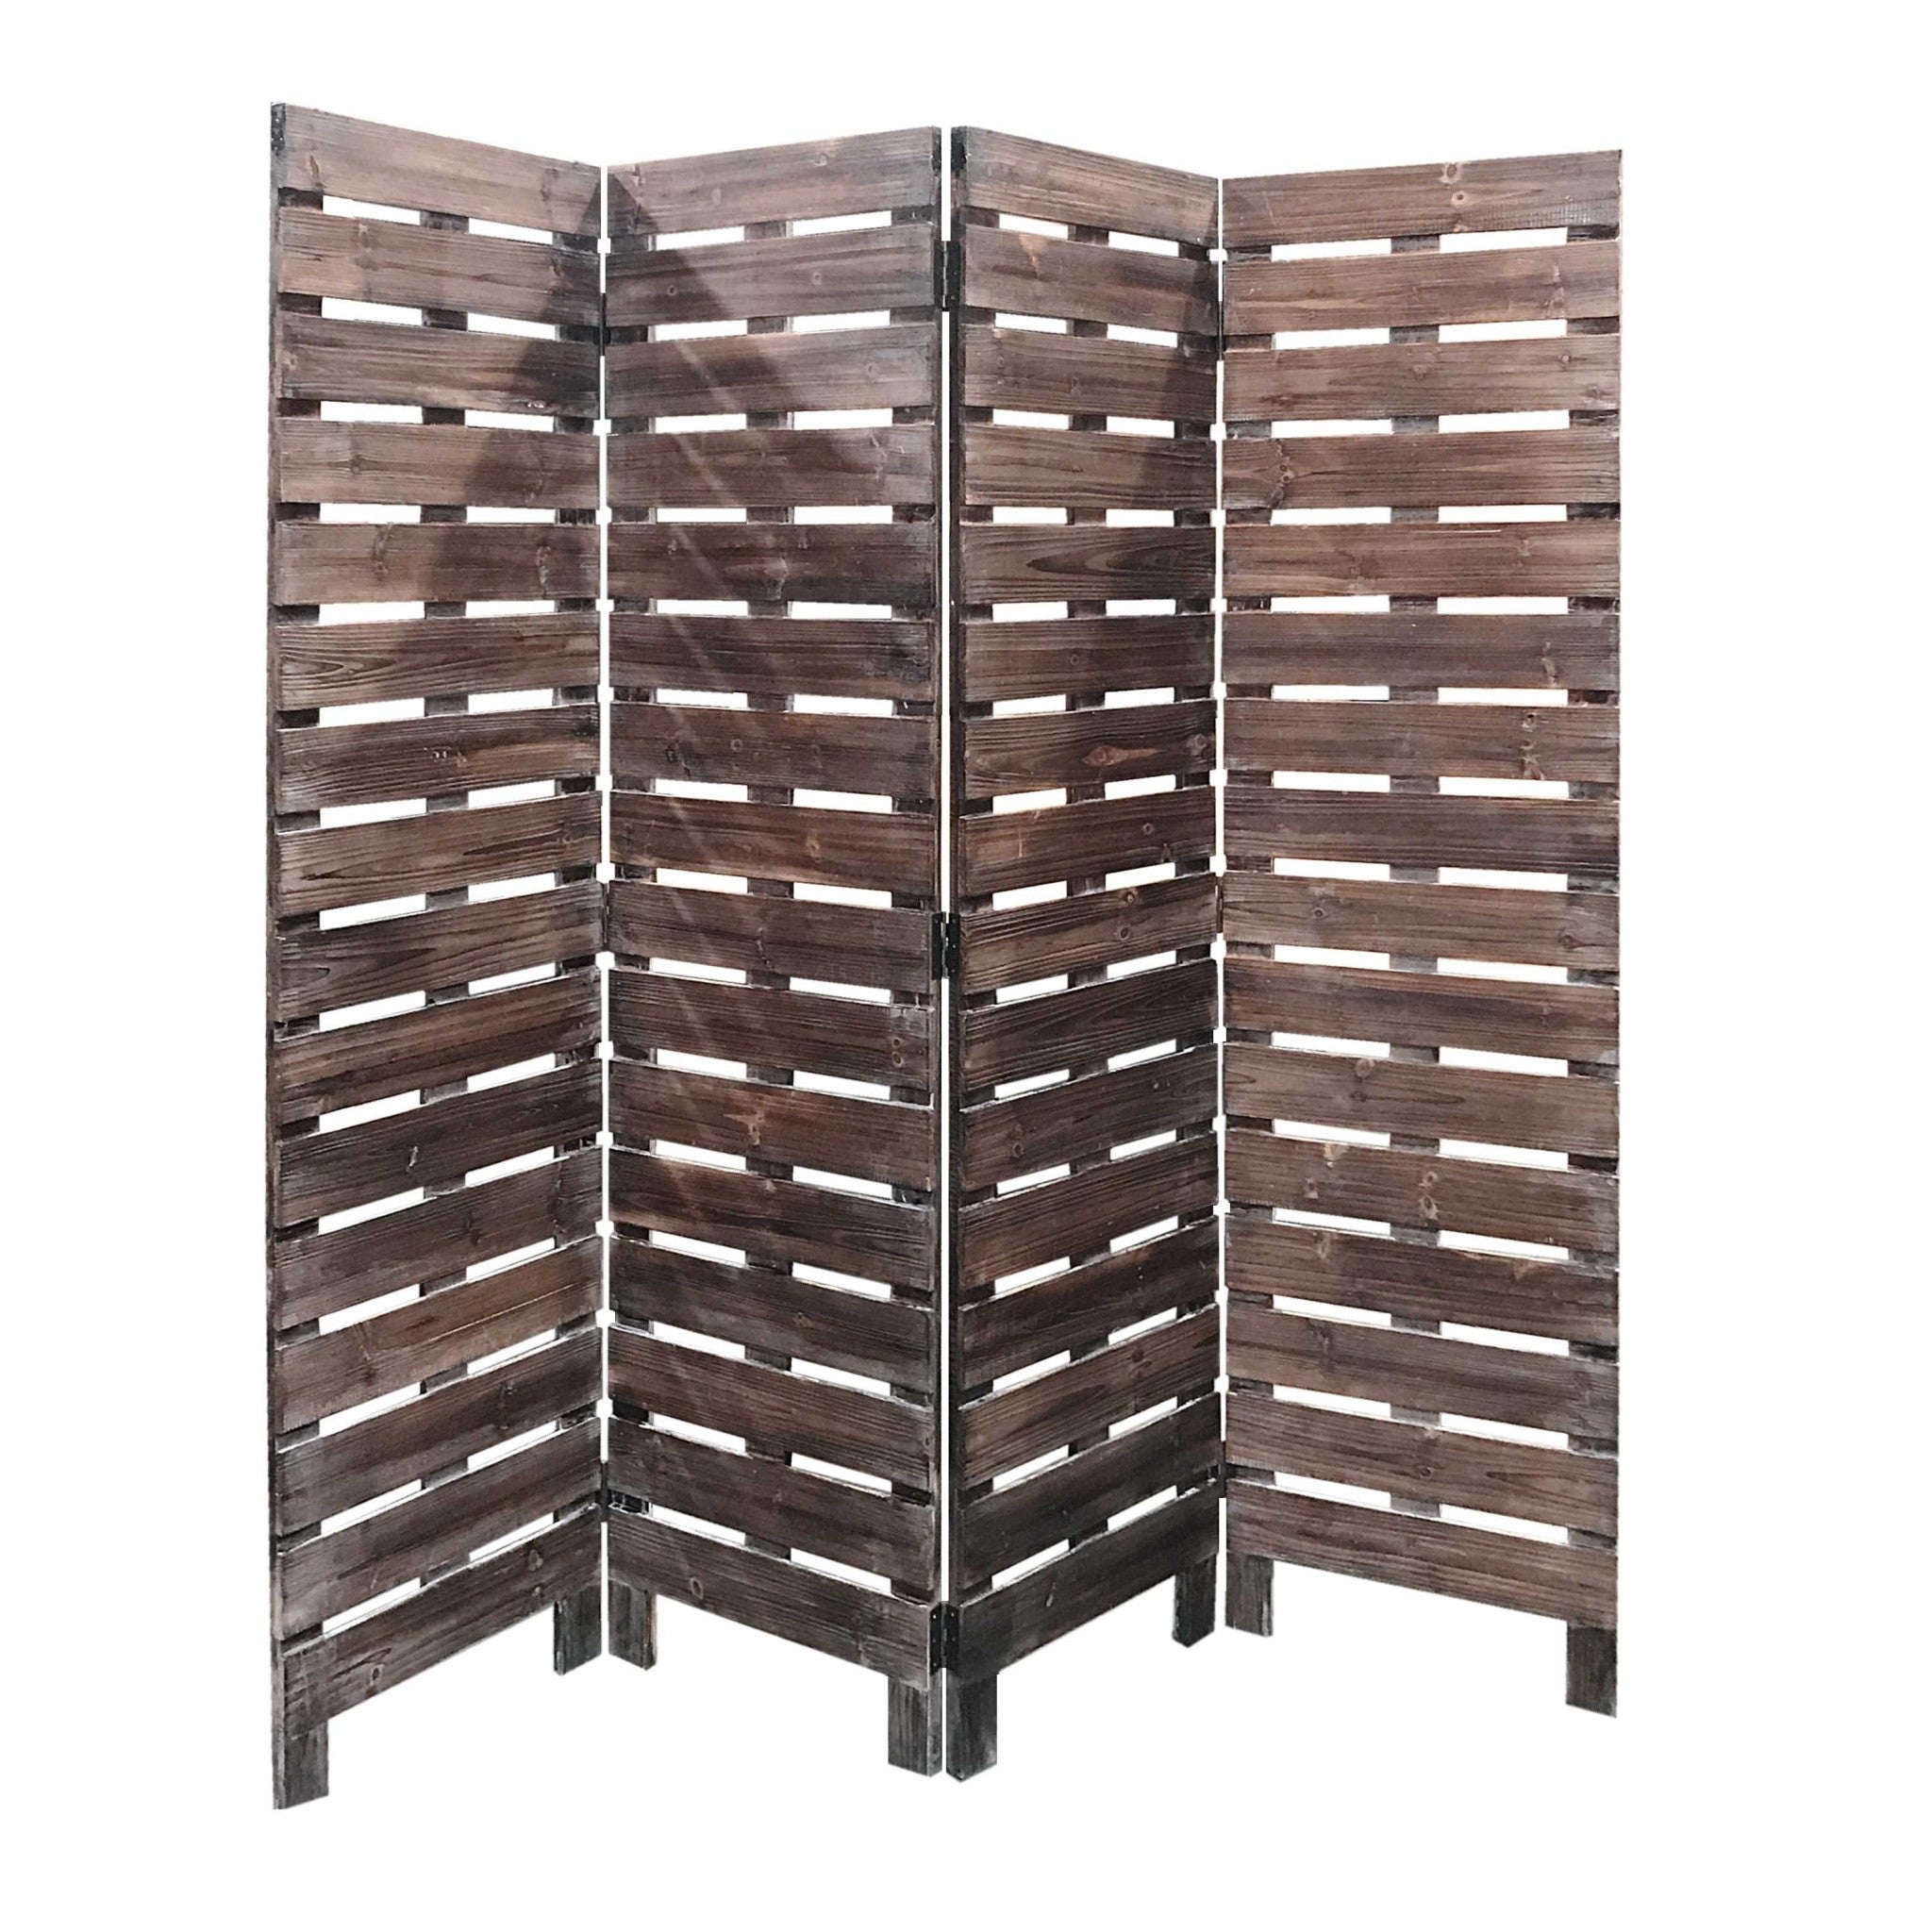 72" Brown Folding Four Panel Screen Room Divider